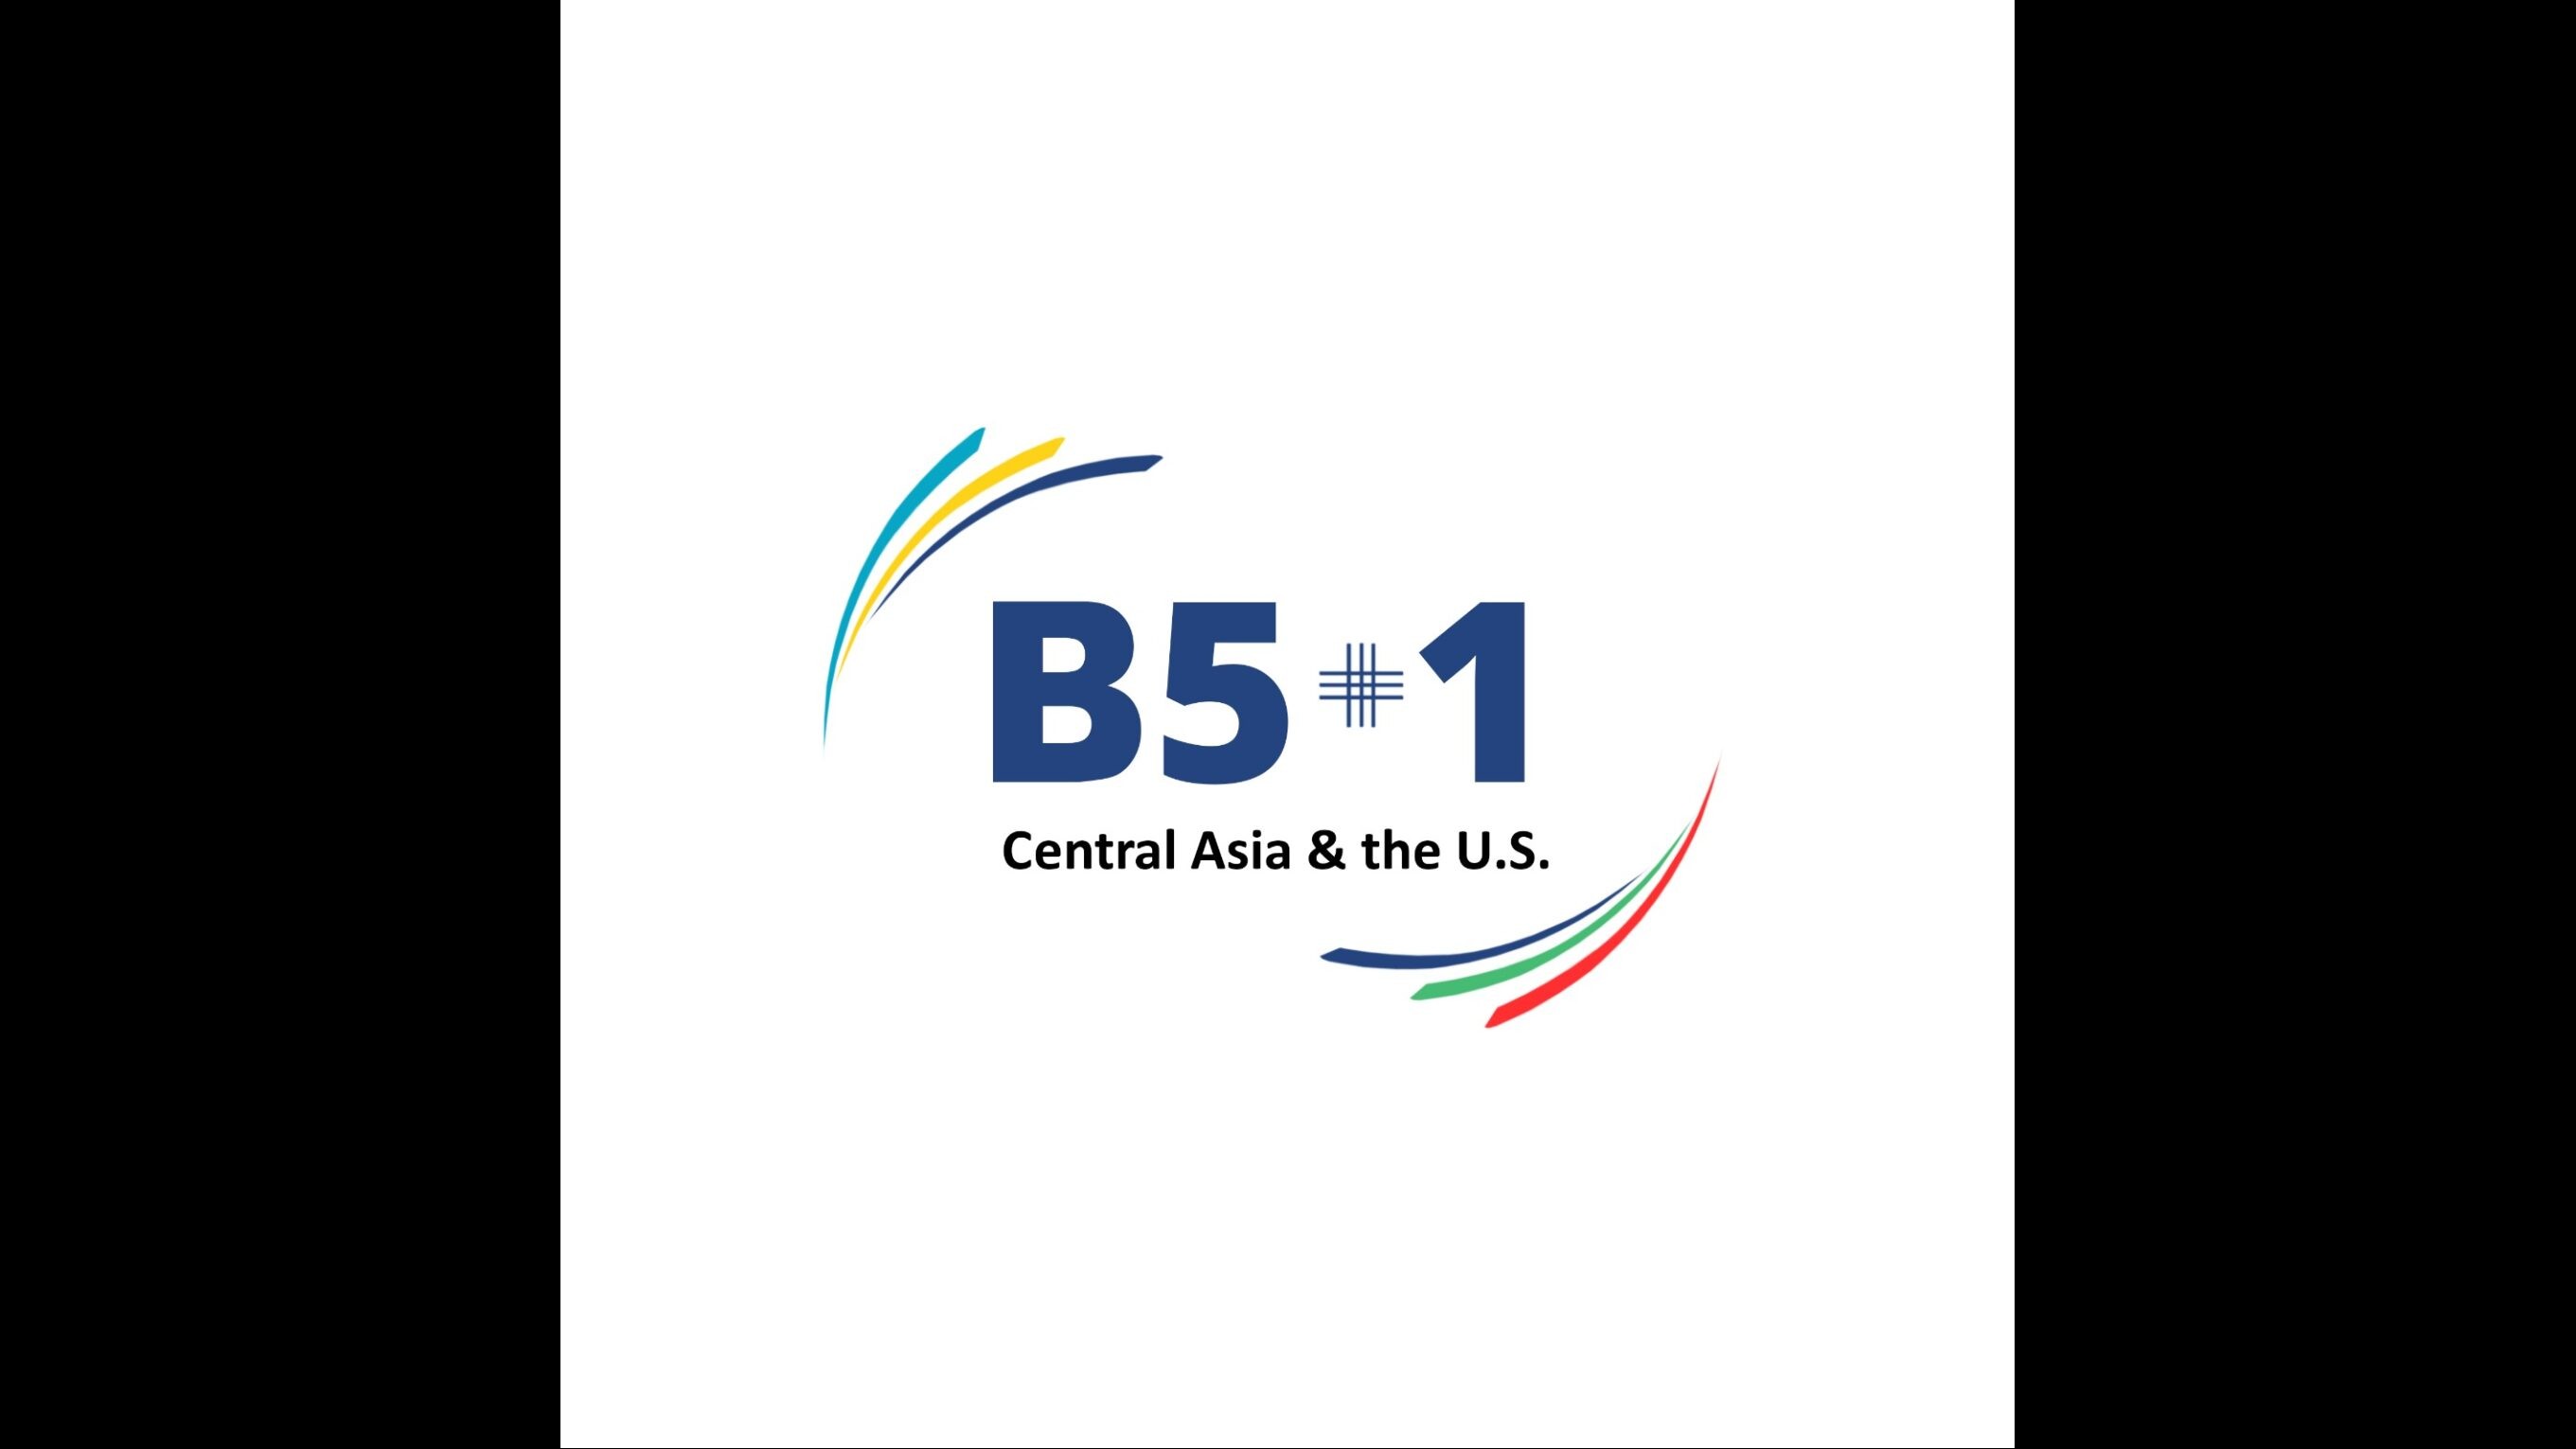 COMMENTARY: THE B5+1 FORUM AND “THE GREATER CENTRAL ASIA” 